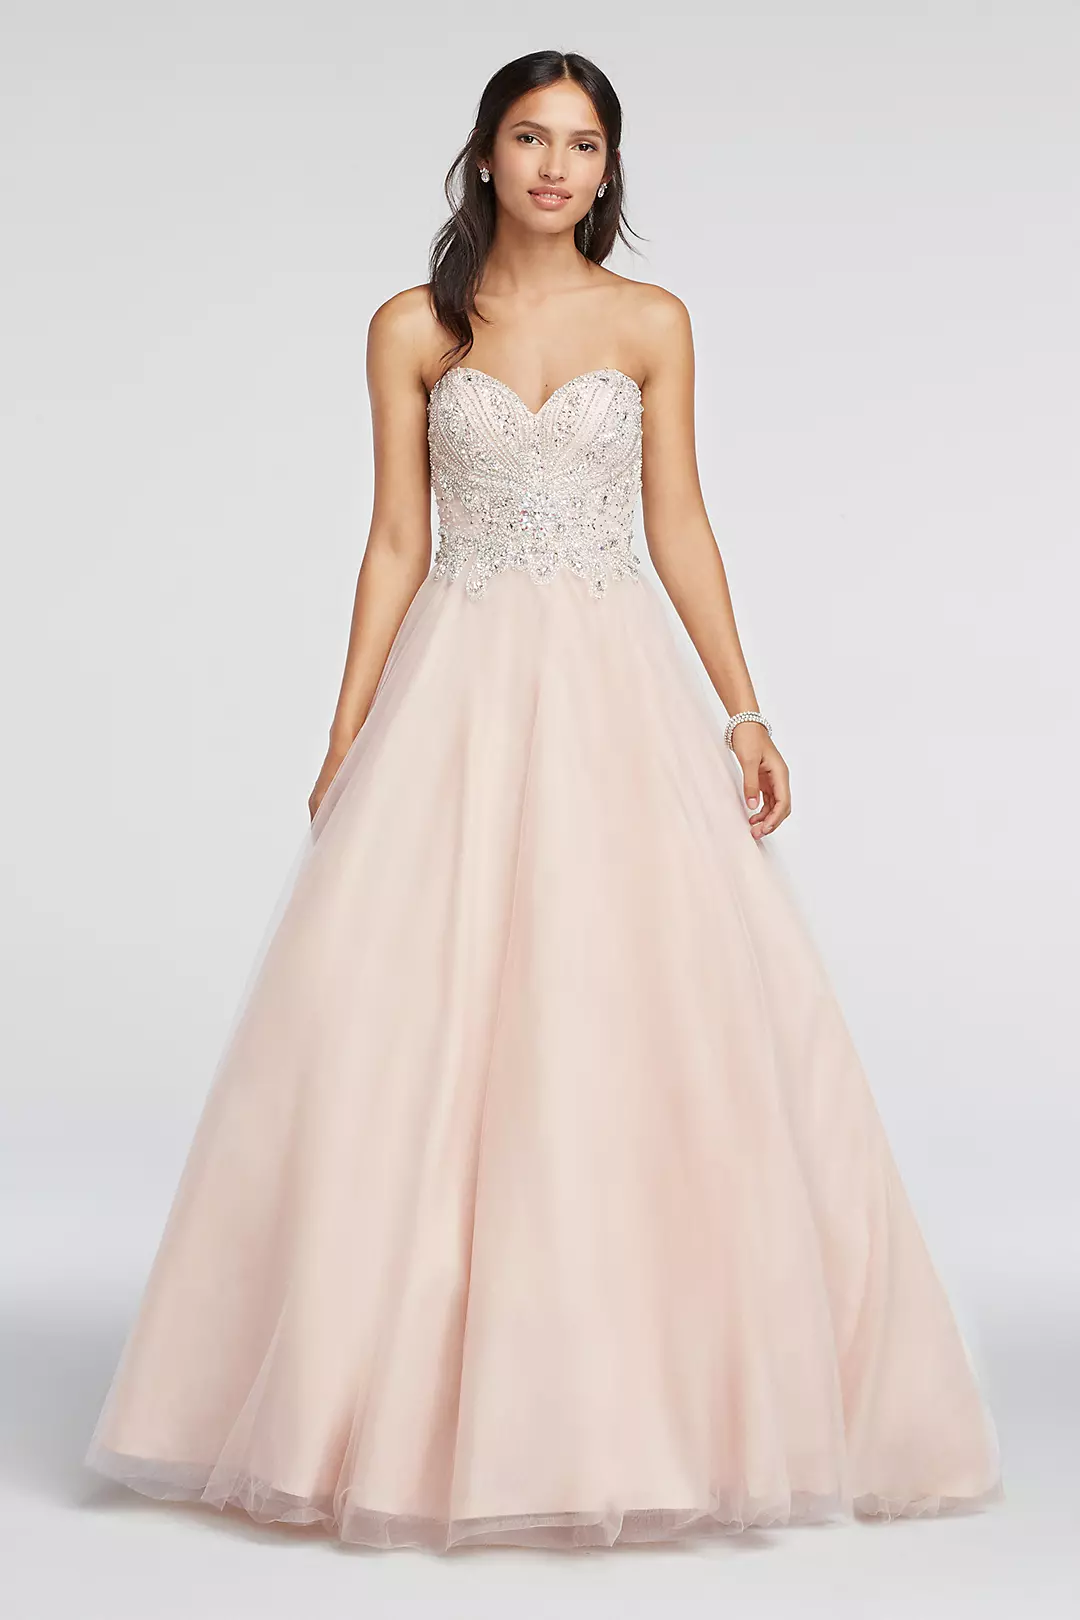 Crystal Beaded Strapless Sweetheart Prom Dress Image